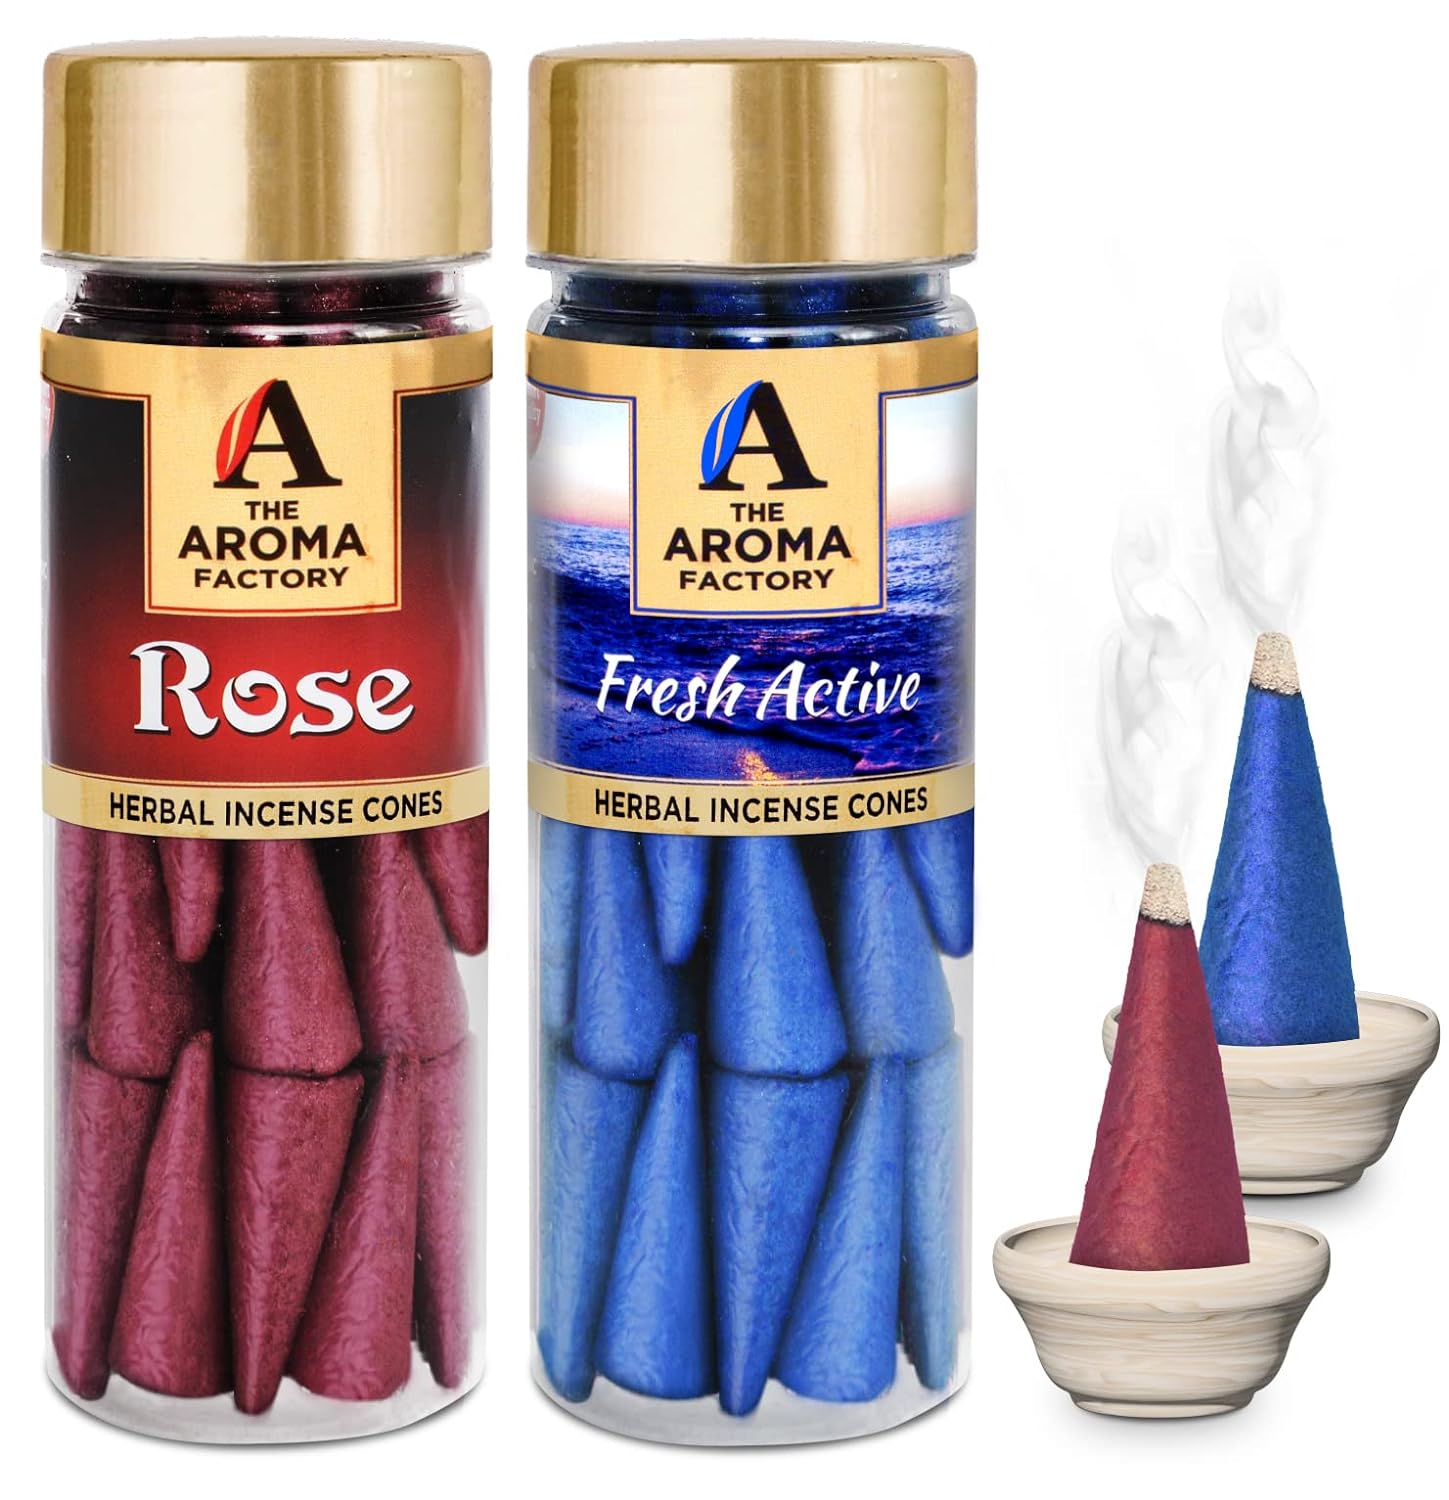 The Aroma Factory Incense Dhoop Cone for Pooja, Rose & Fresh Active (100% Herbal & 0% Charcoal) 2 Bottles x 30 Cones